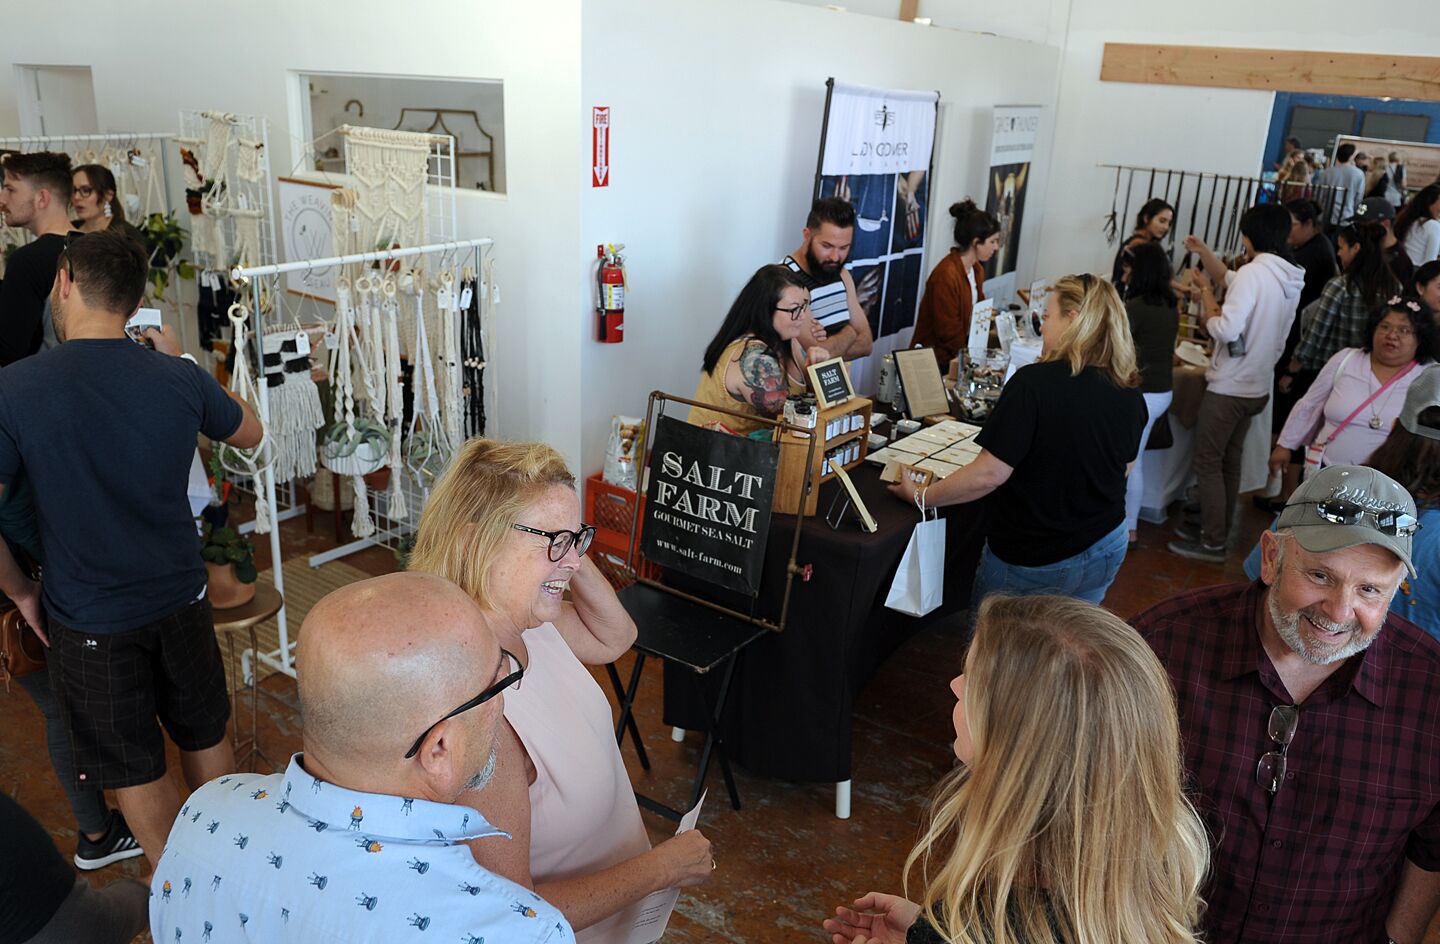 The local creative community has a new place to call home thanks to the grand opening of the San Diego Made Factory in Logan Heights on Saturday, May 4, 2019.